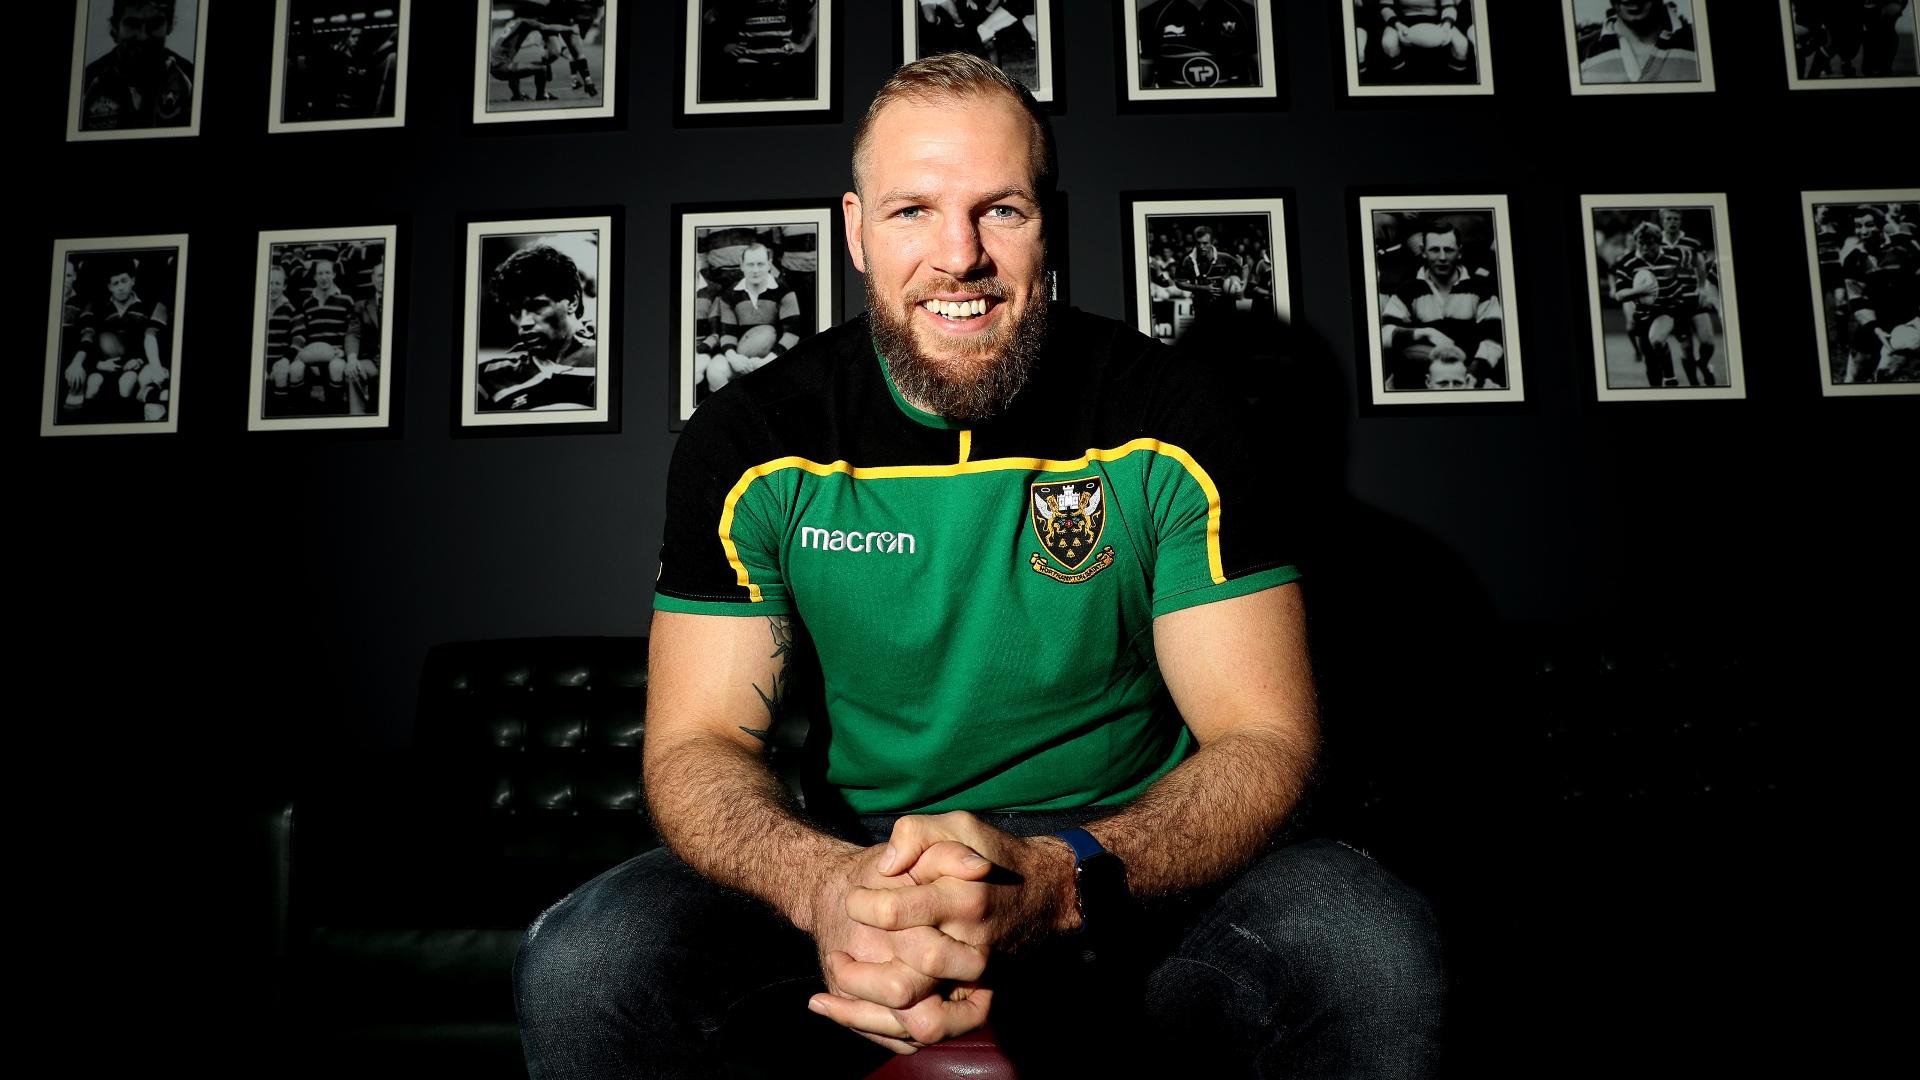 'There is a large element of fear involved.' Haskell on his switch from rugby to MMA